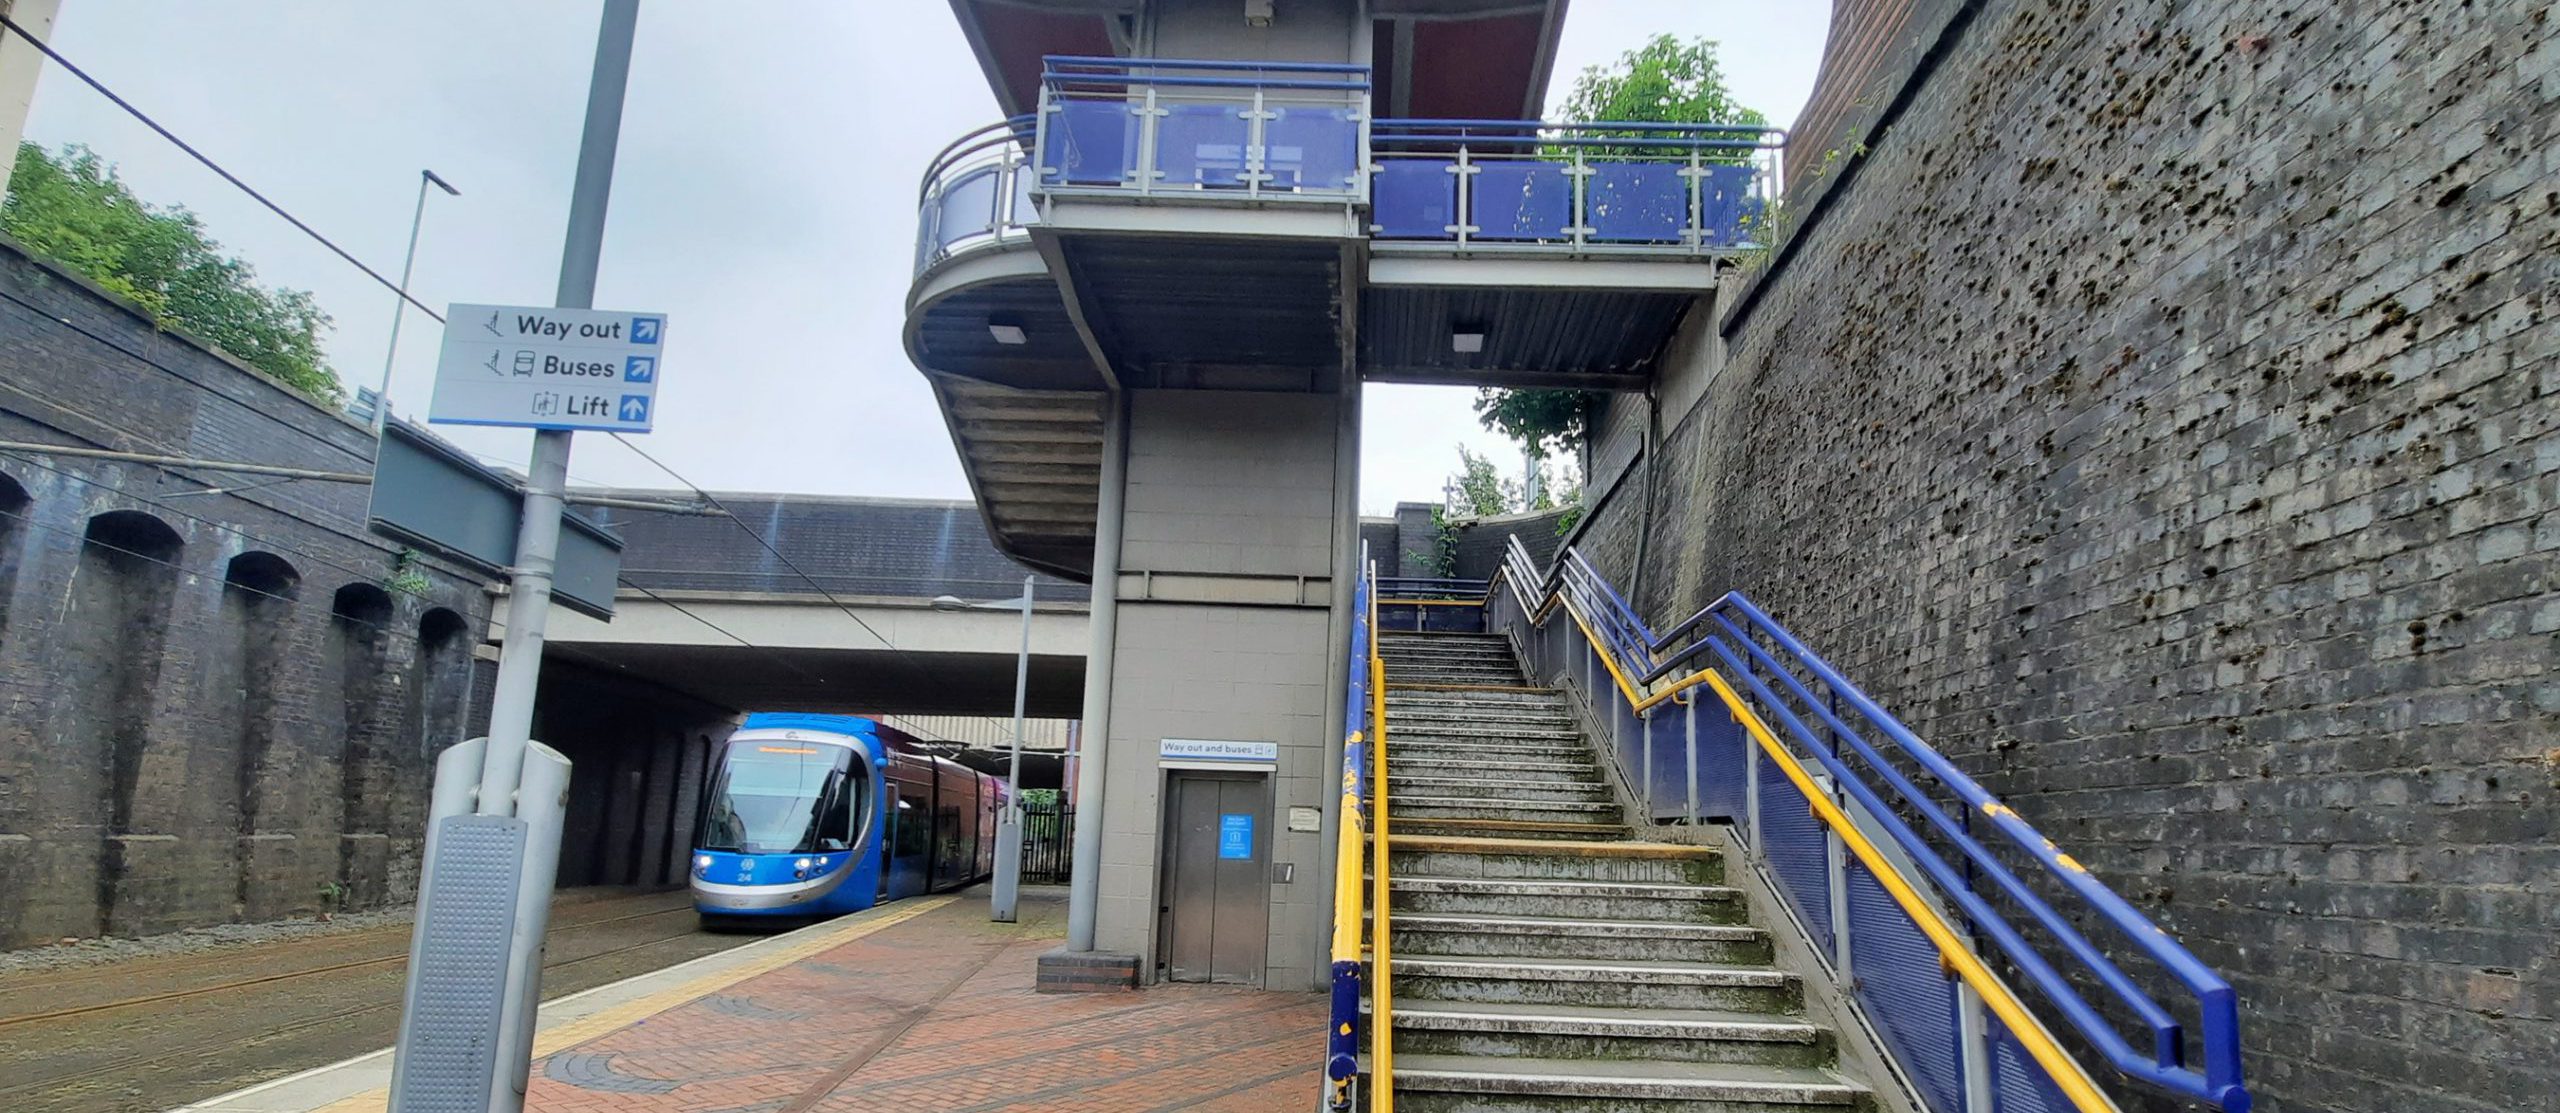 Image of tram stop stairs